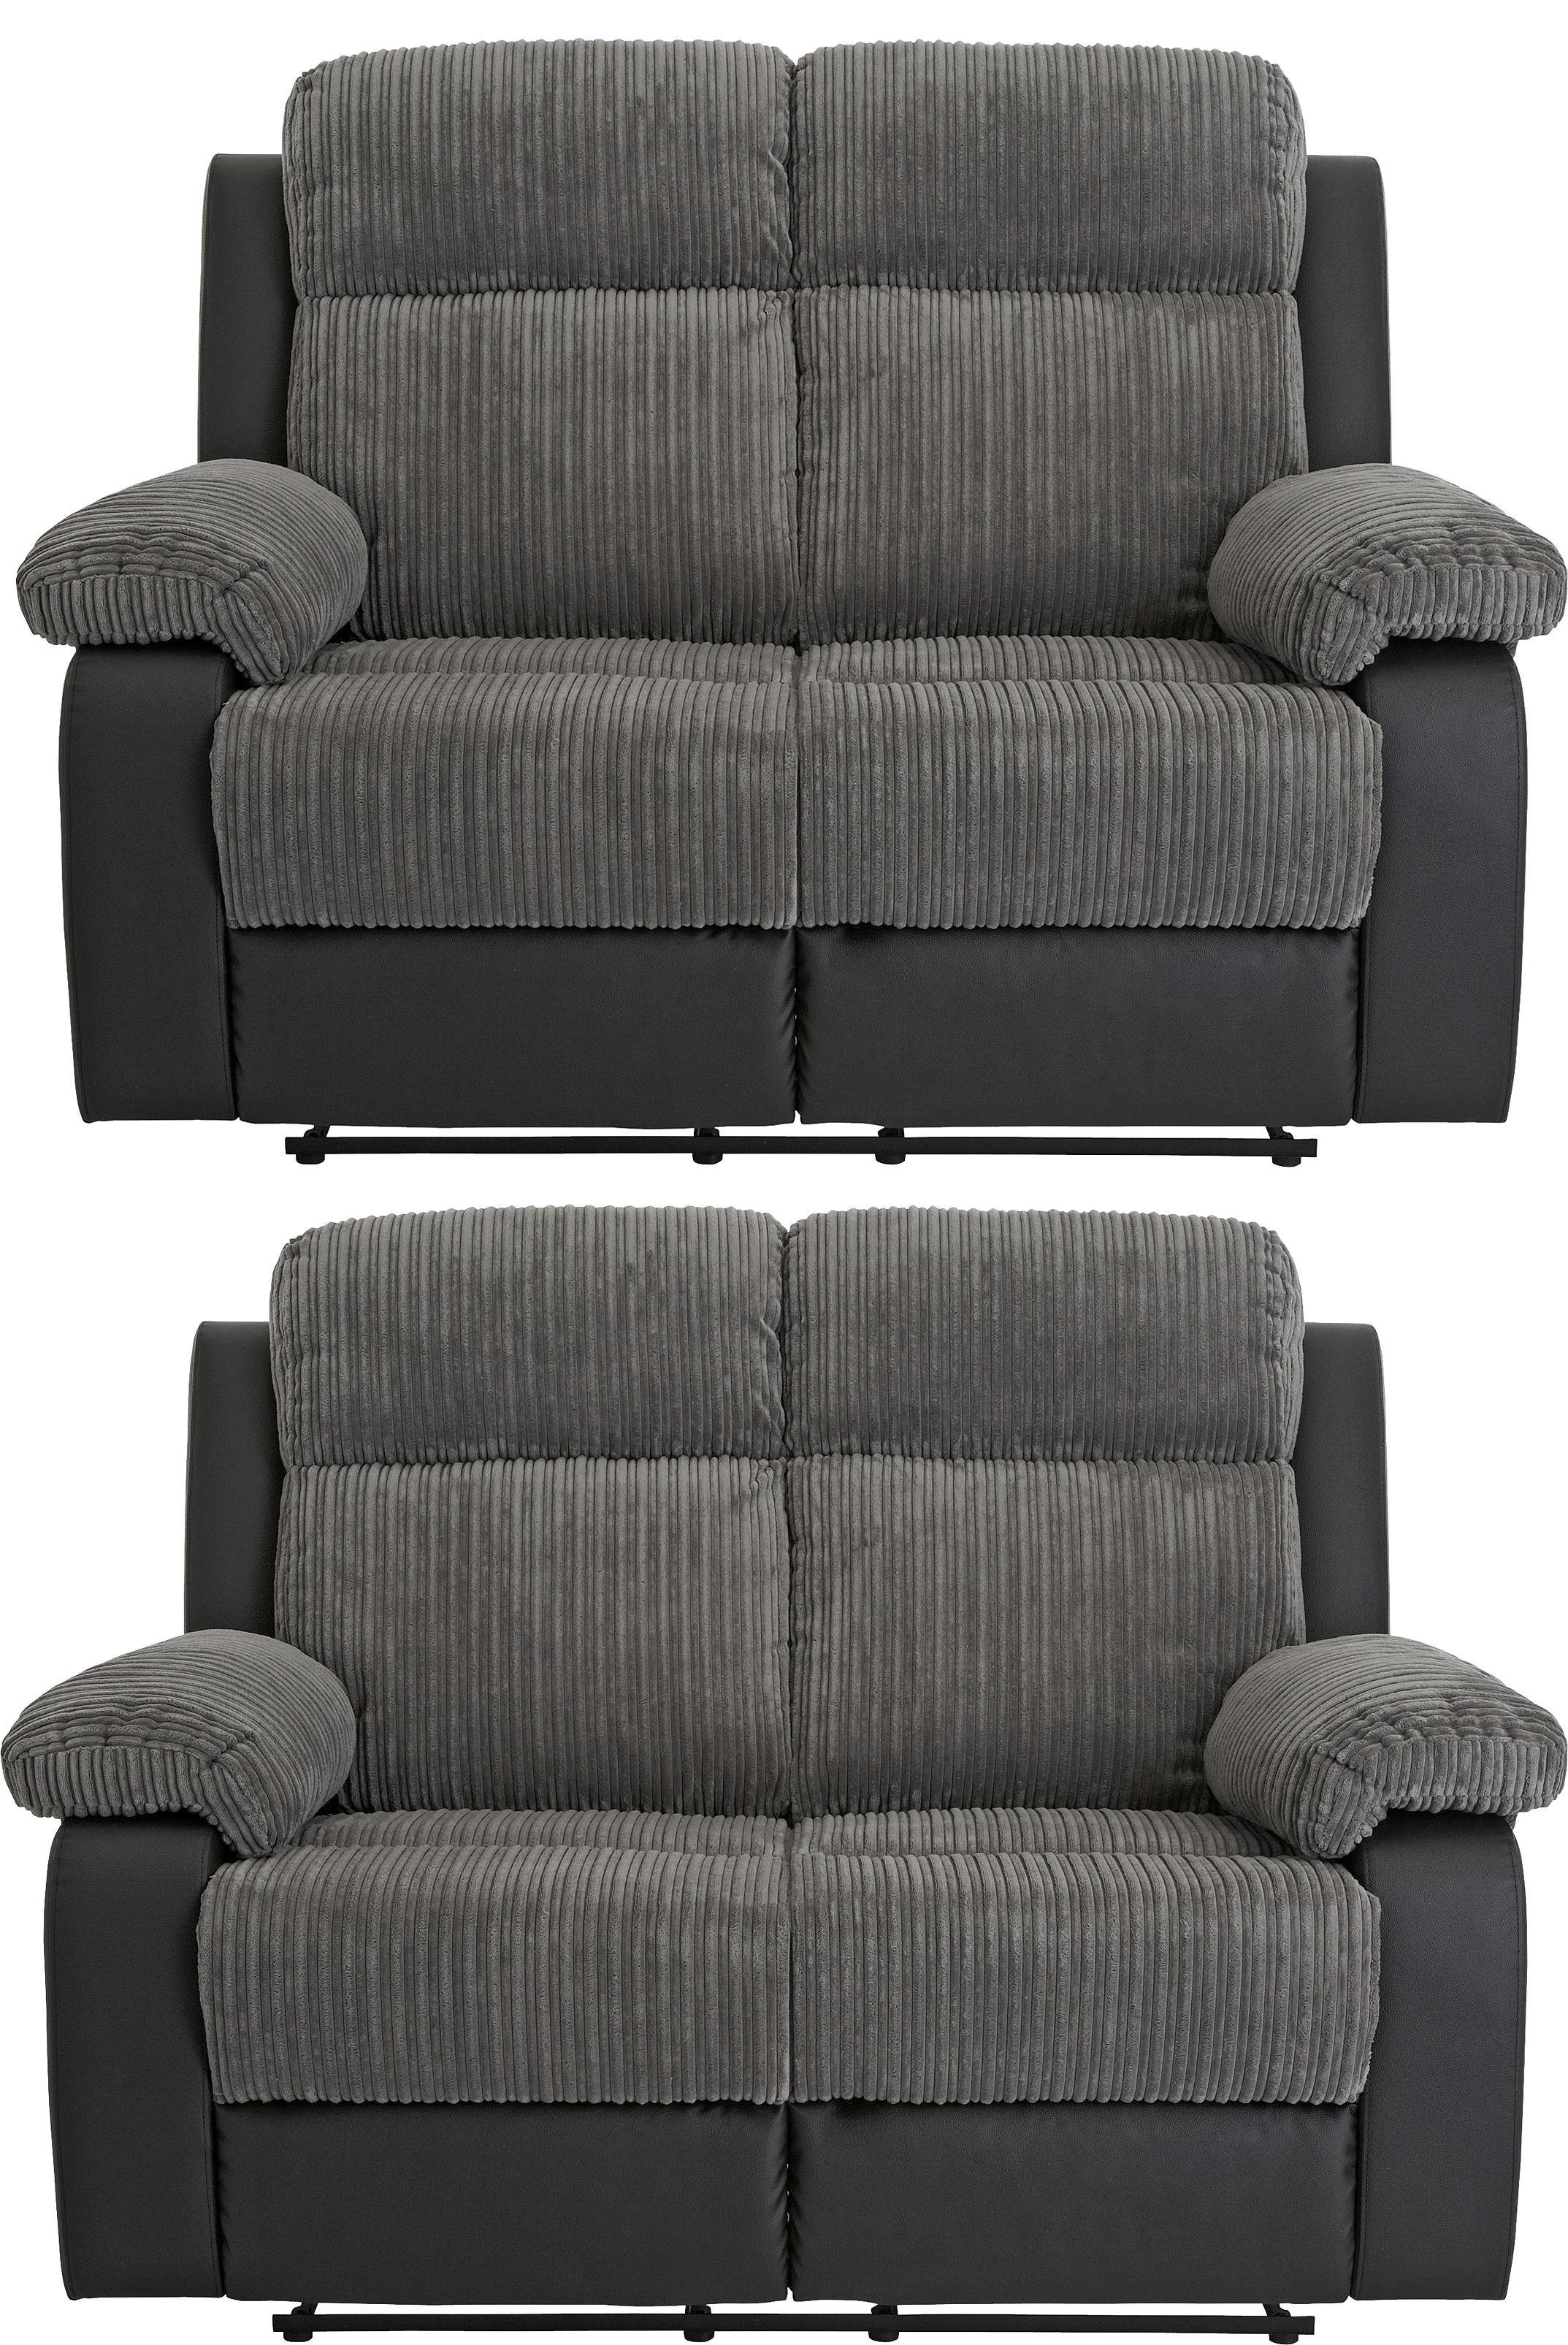 Argos Home Bradley Pair of 2 Seater Recliner Sofa - Charcoal